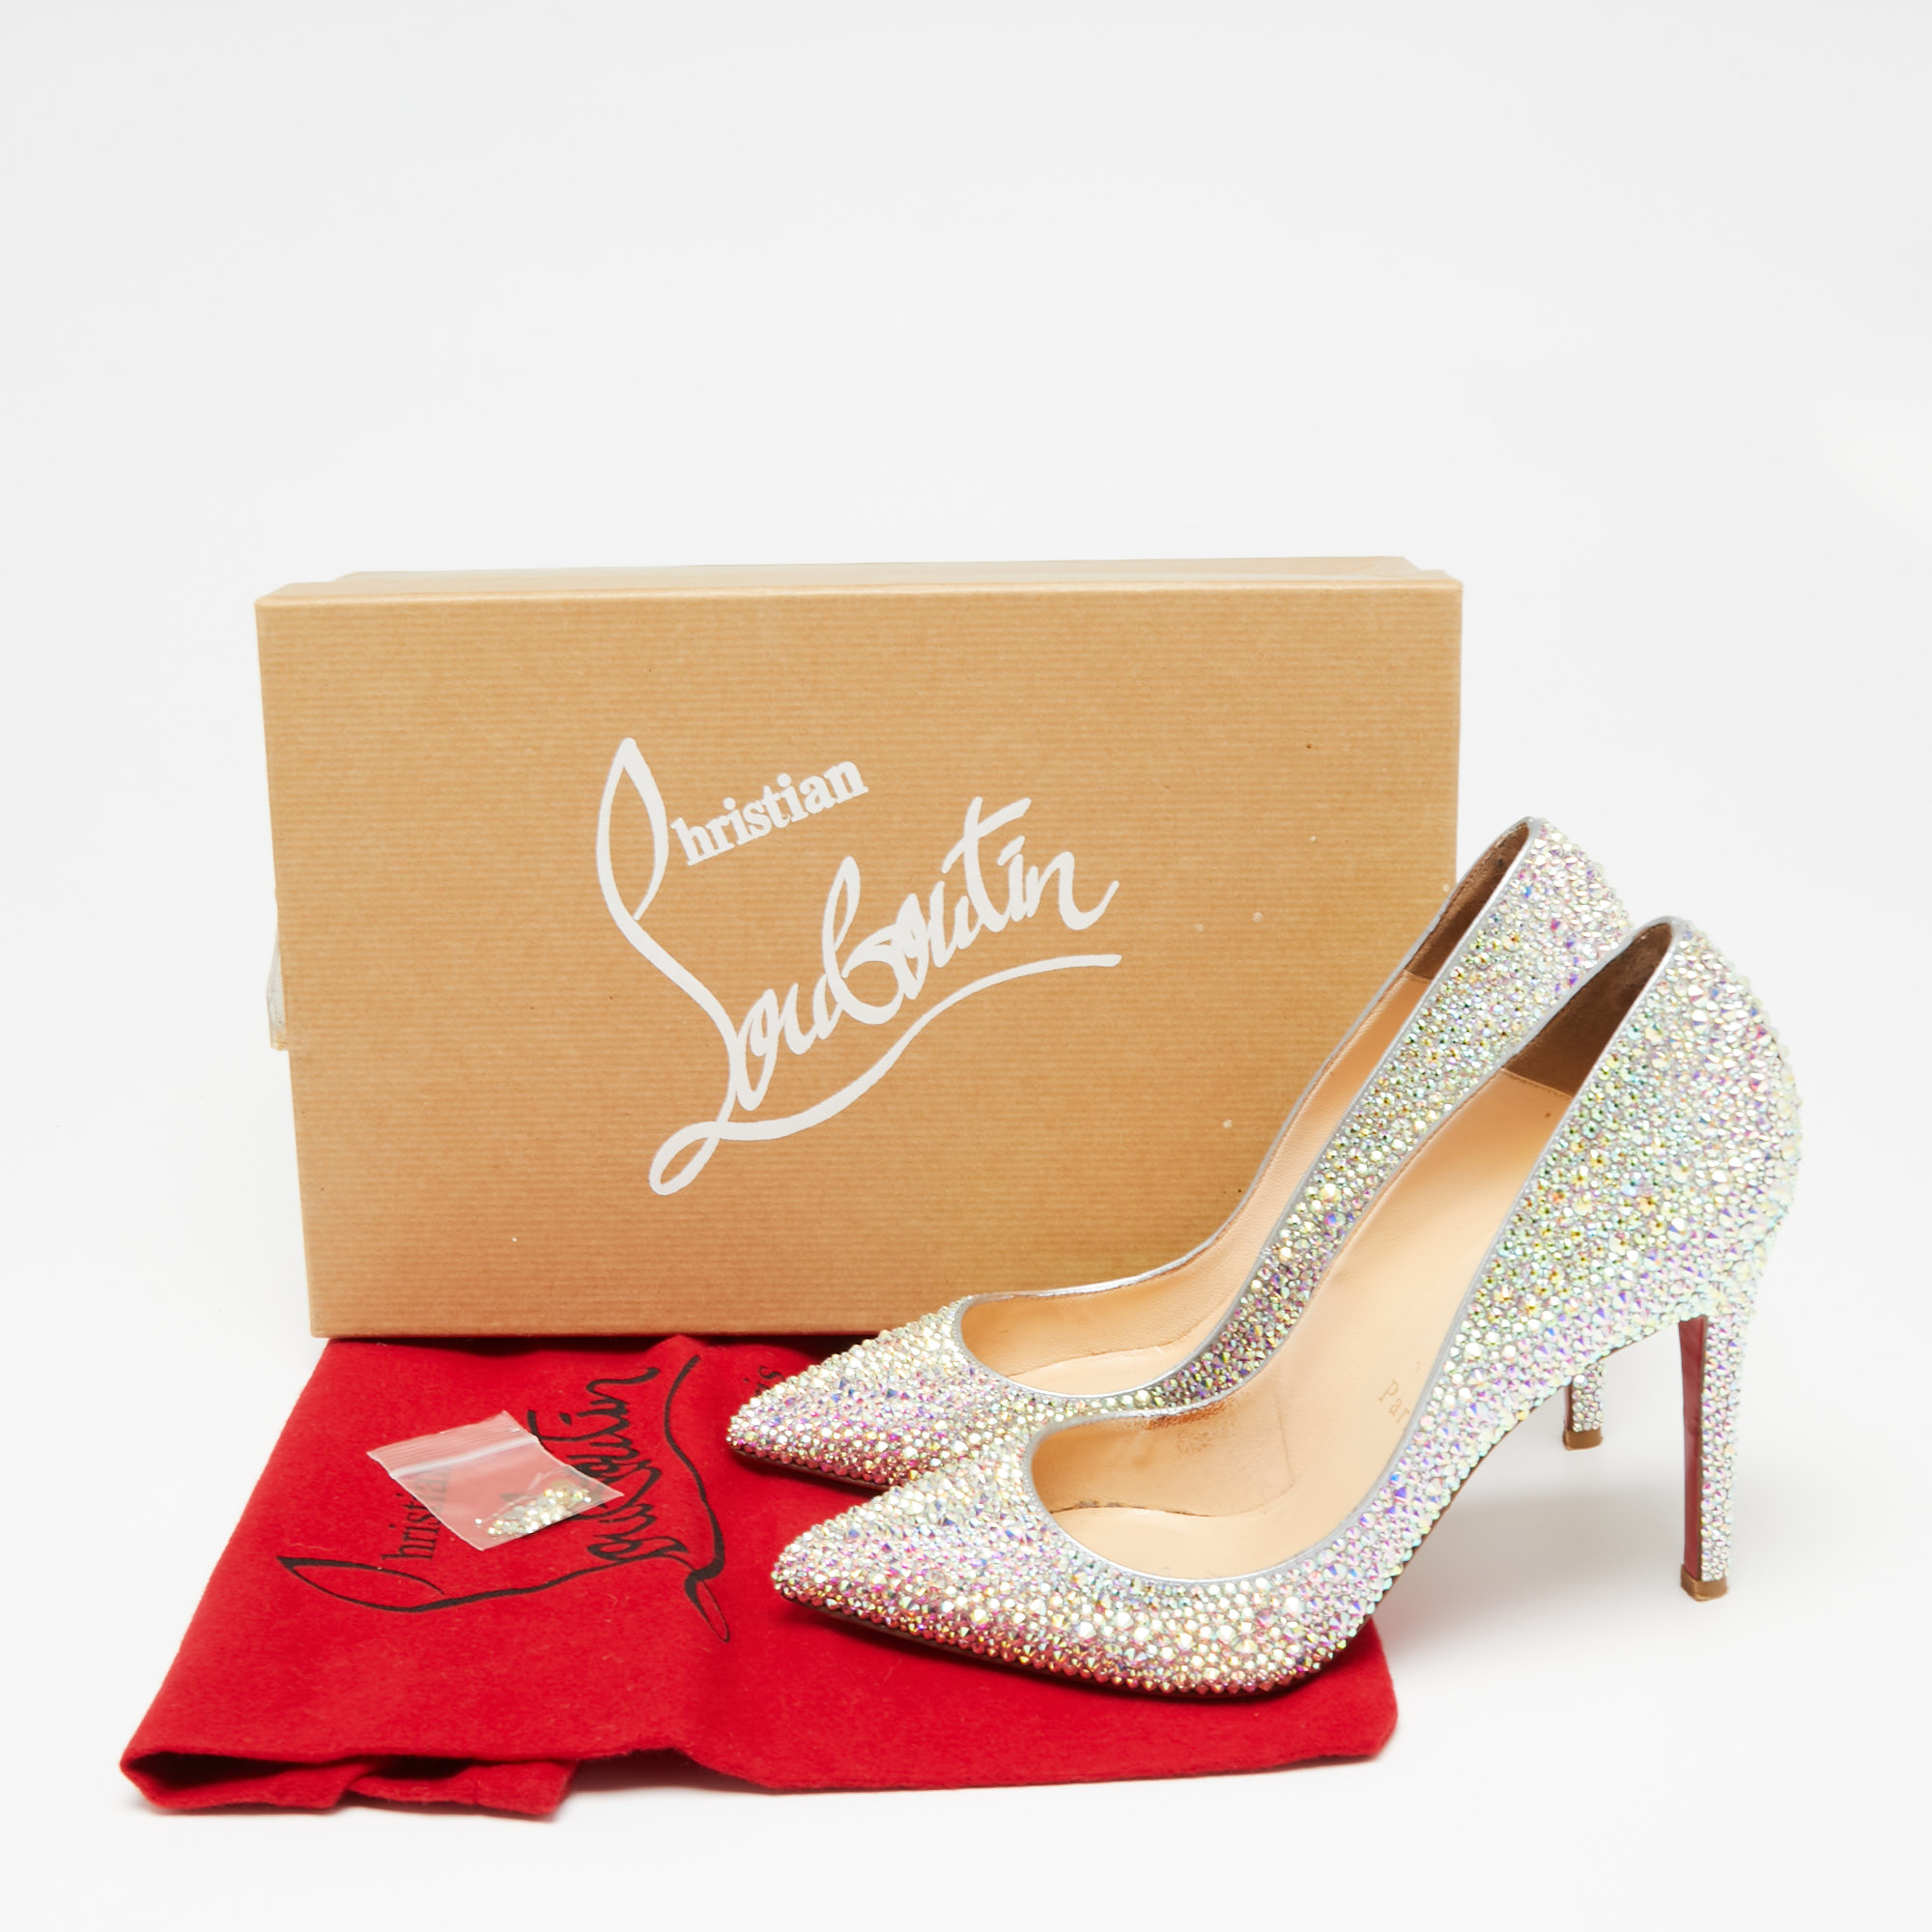 Christian Louboutin Multicolor Leather Pigalle Strass Degrade Pumps Size 36